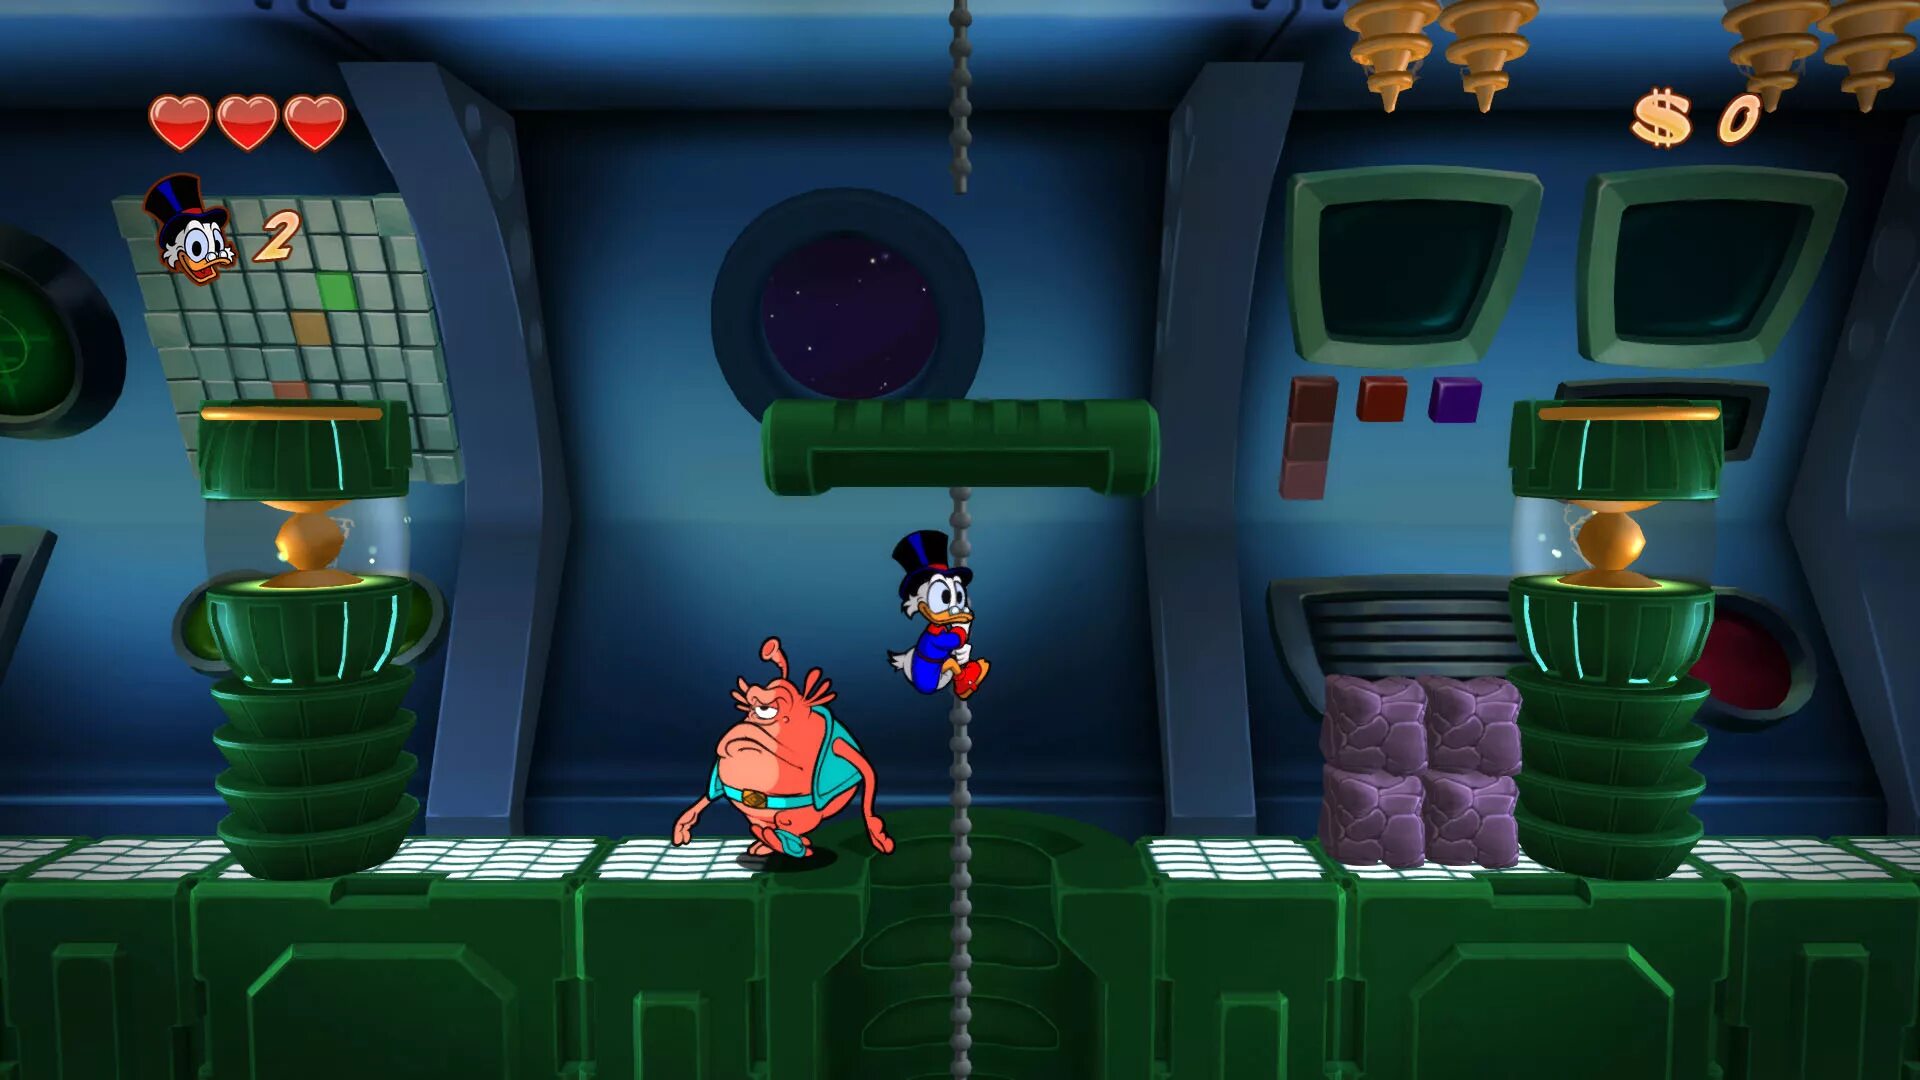 Duck Tales Remastered игра. Утиные истории ремастер. Duck Tales 2 Remastered. Ducktales Remastered 2013.